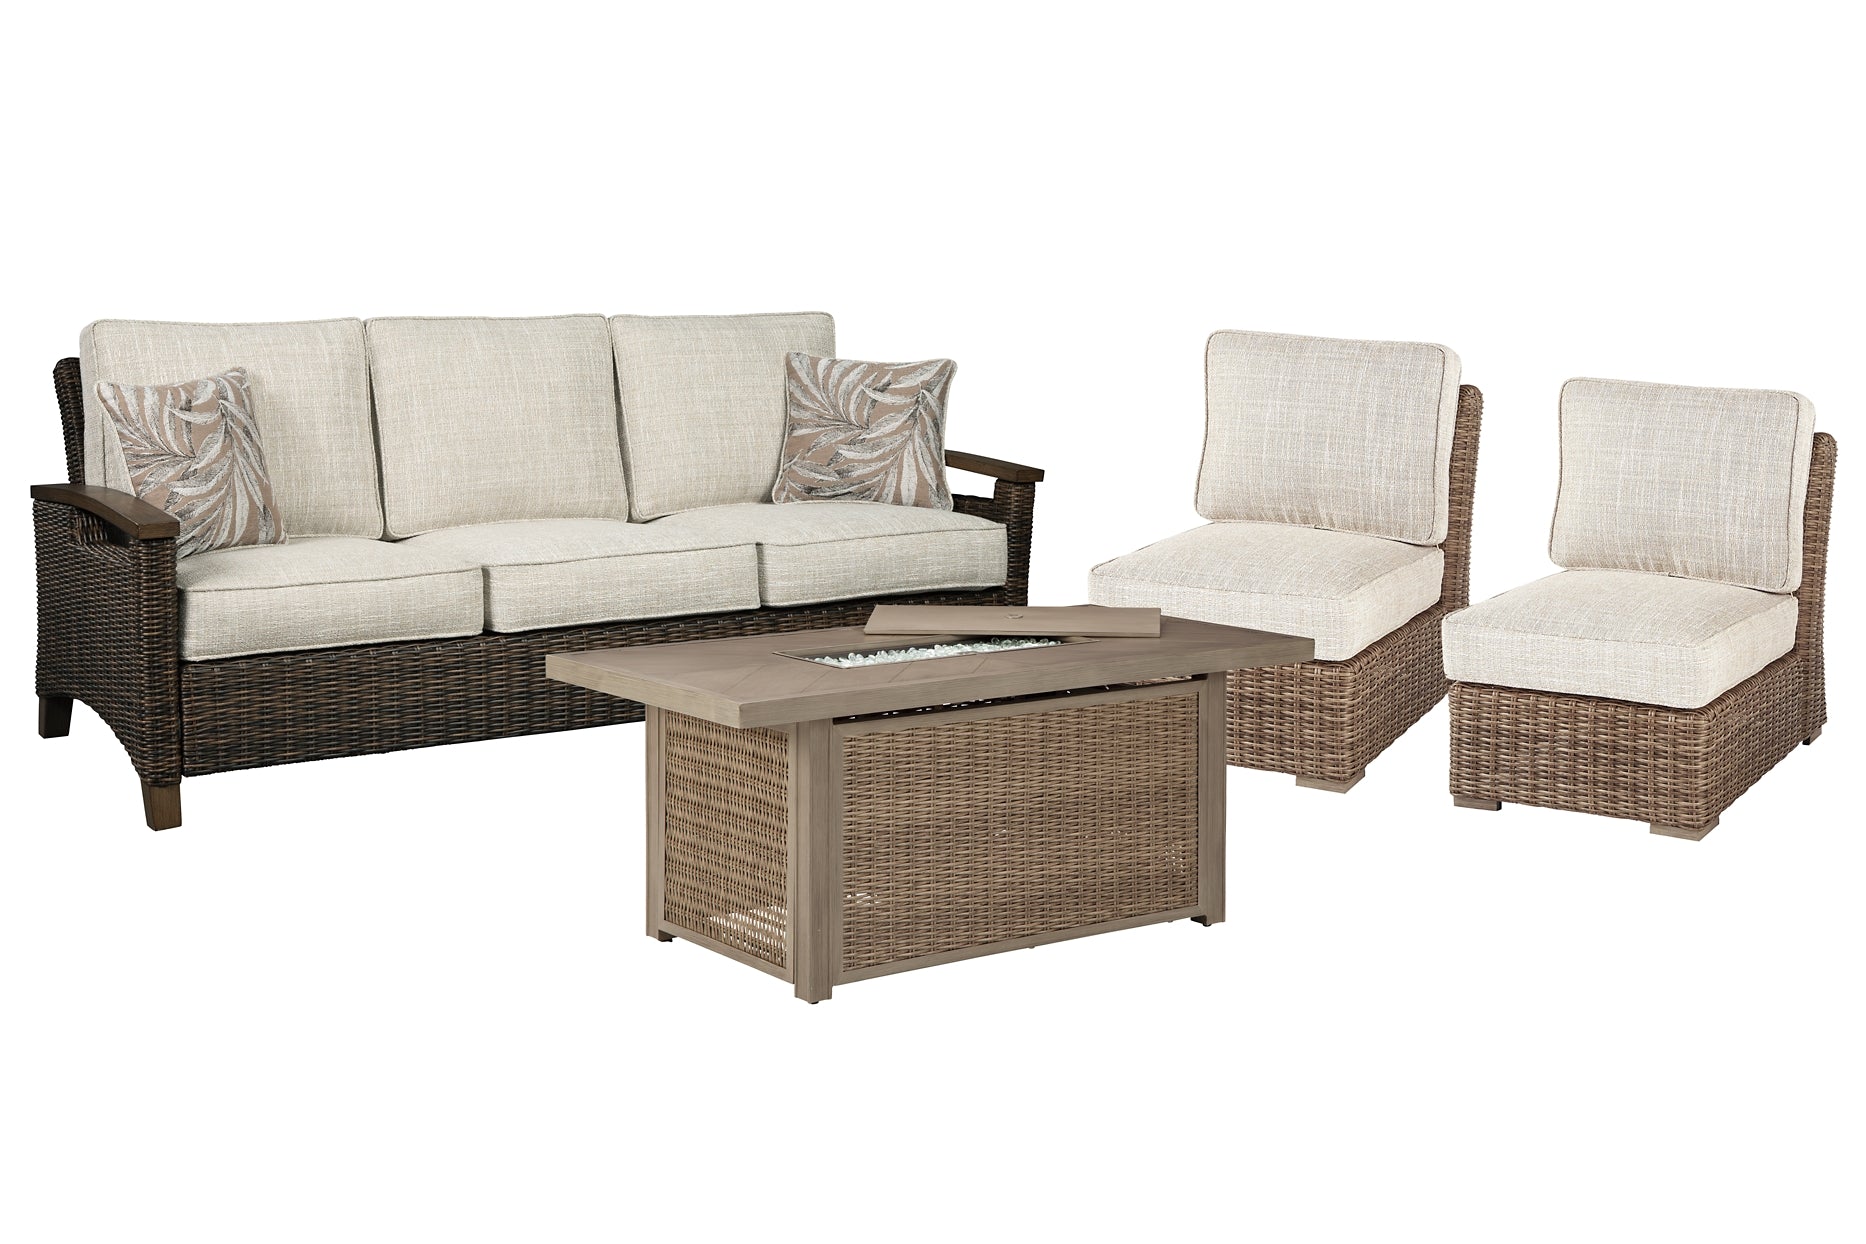 Beachcroft Outdoor Sofa and 2 Lounge Chairs with Fire Pit Table Wilson Furniture (OH)  in Bridgeport, Ohio. Serving Bridgeport, Yorkville, Bellaire, & Avondale